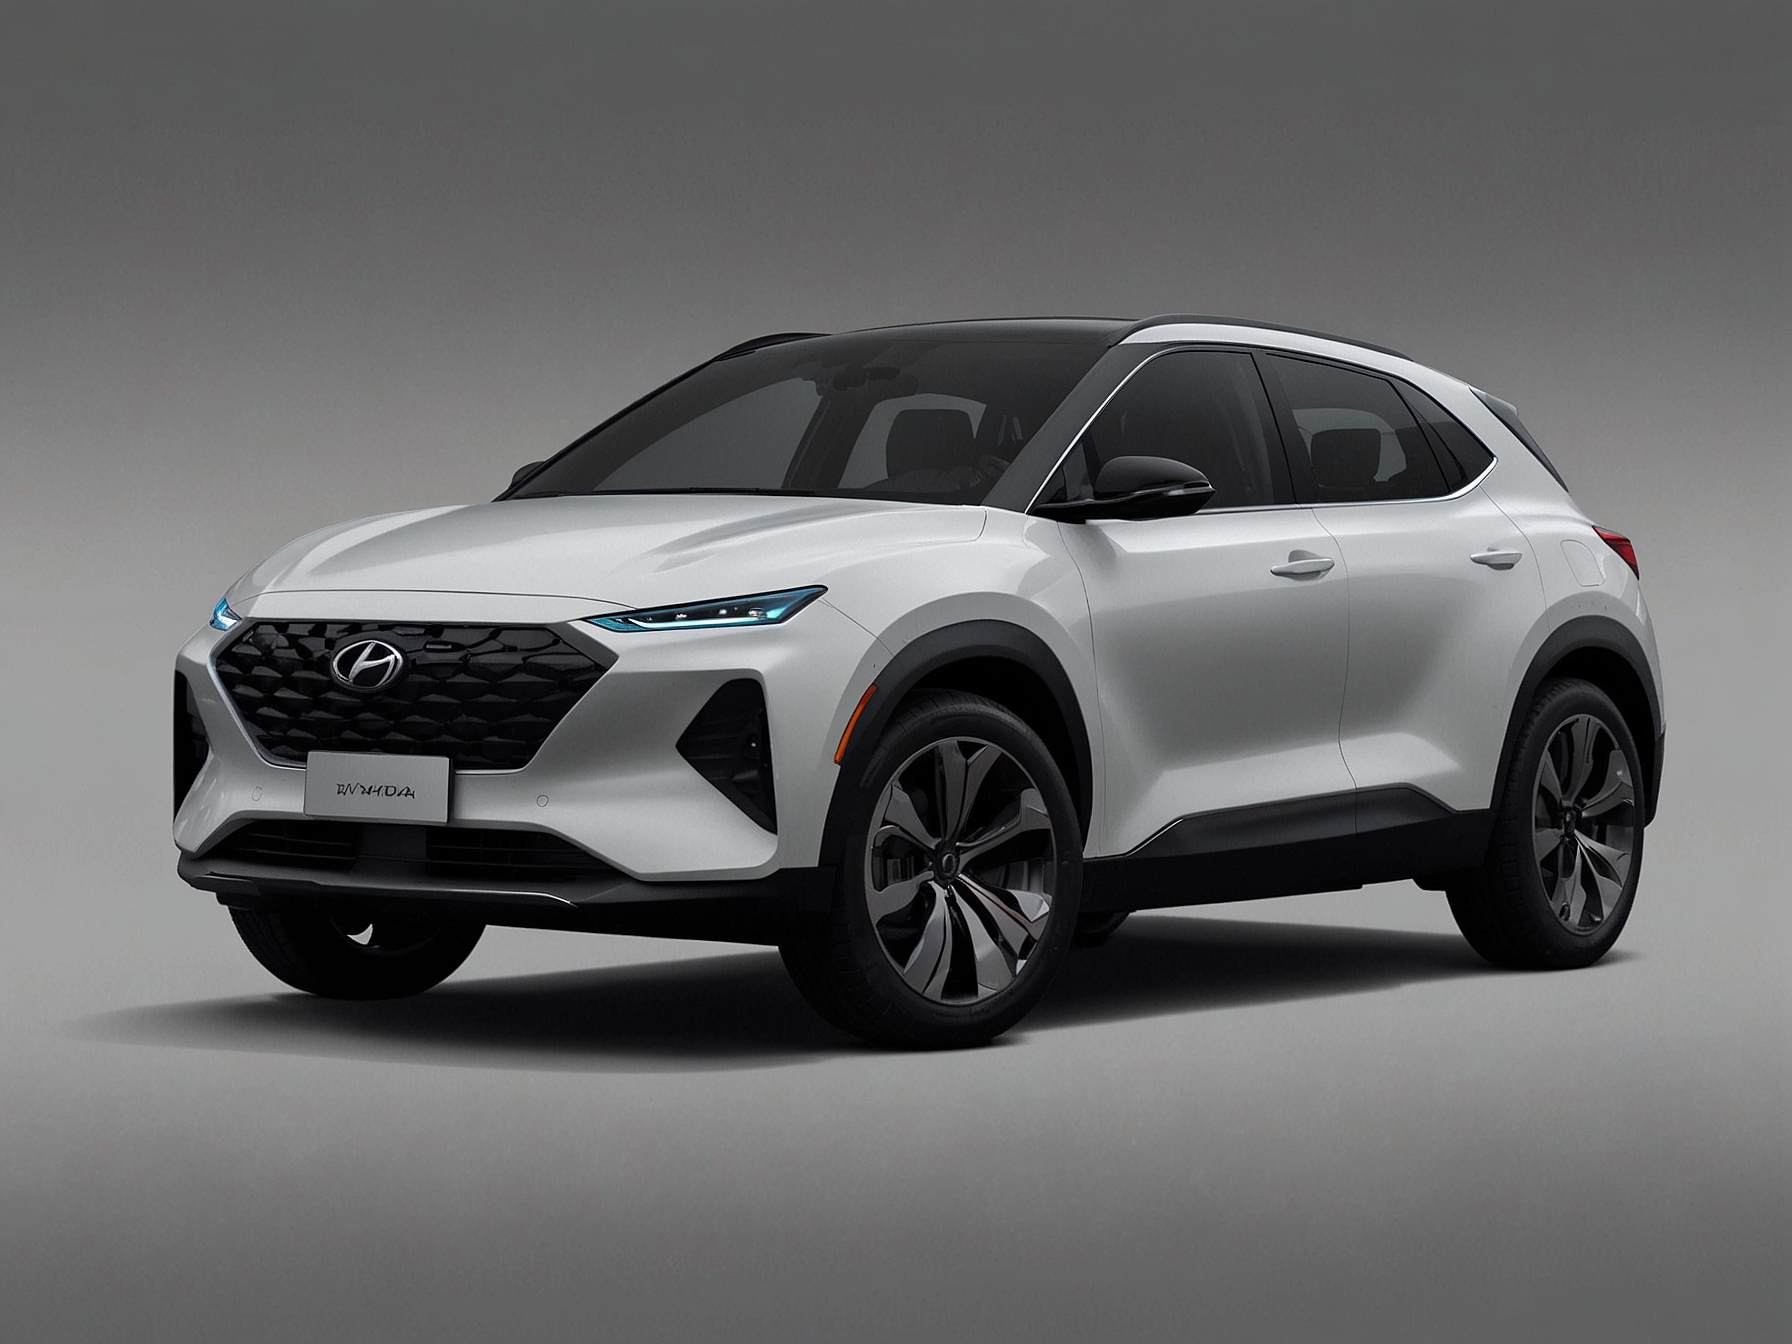 Hyundai's new electric vehicle showcases a sleek, modern design with advanced driver-assistance systems and state-of-the-art infotainment, emphasizing performance and safety.